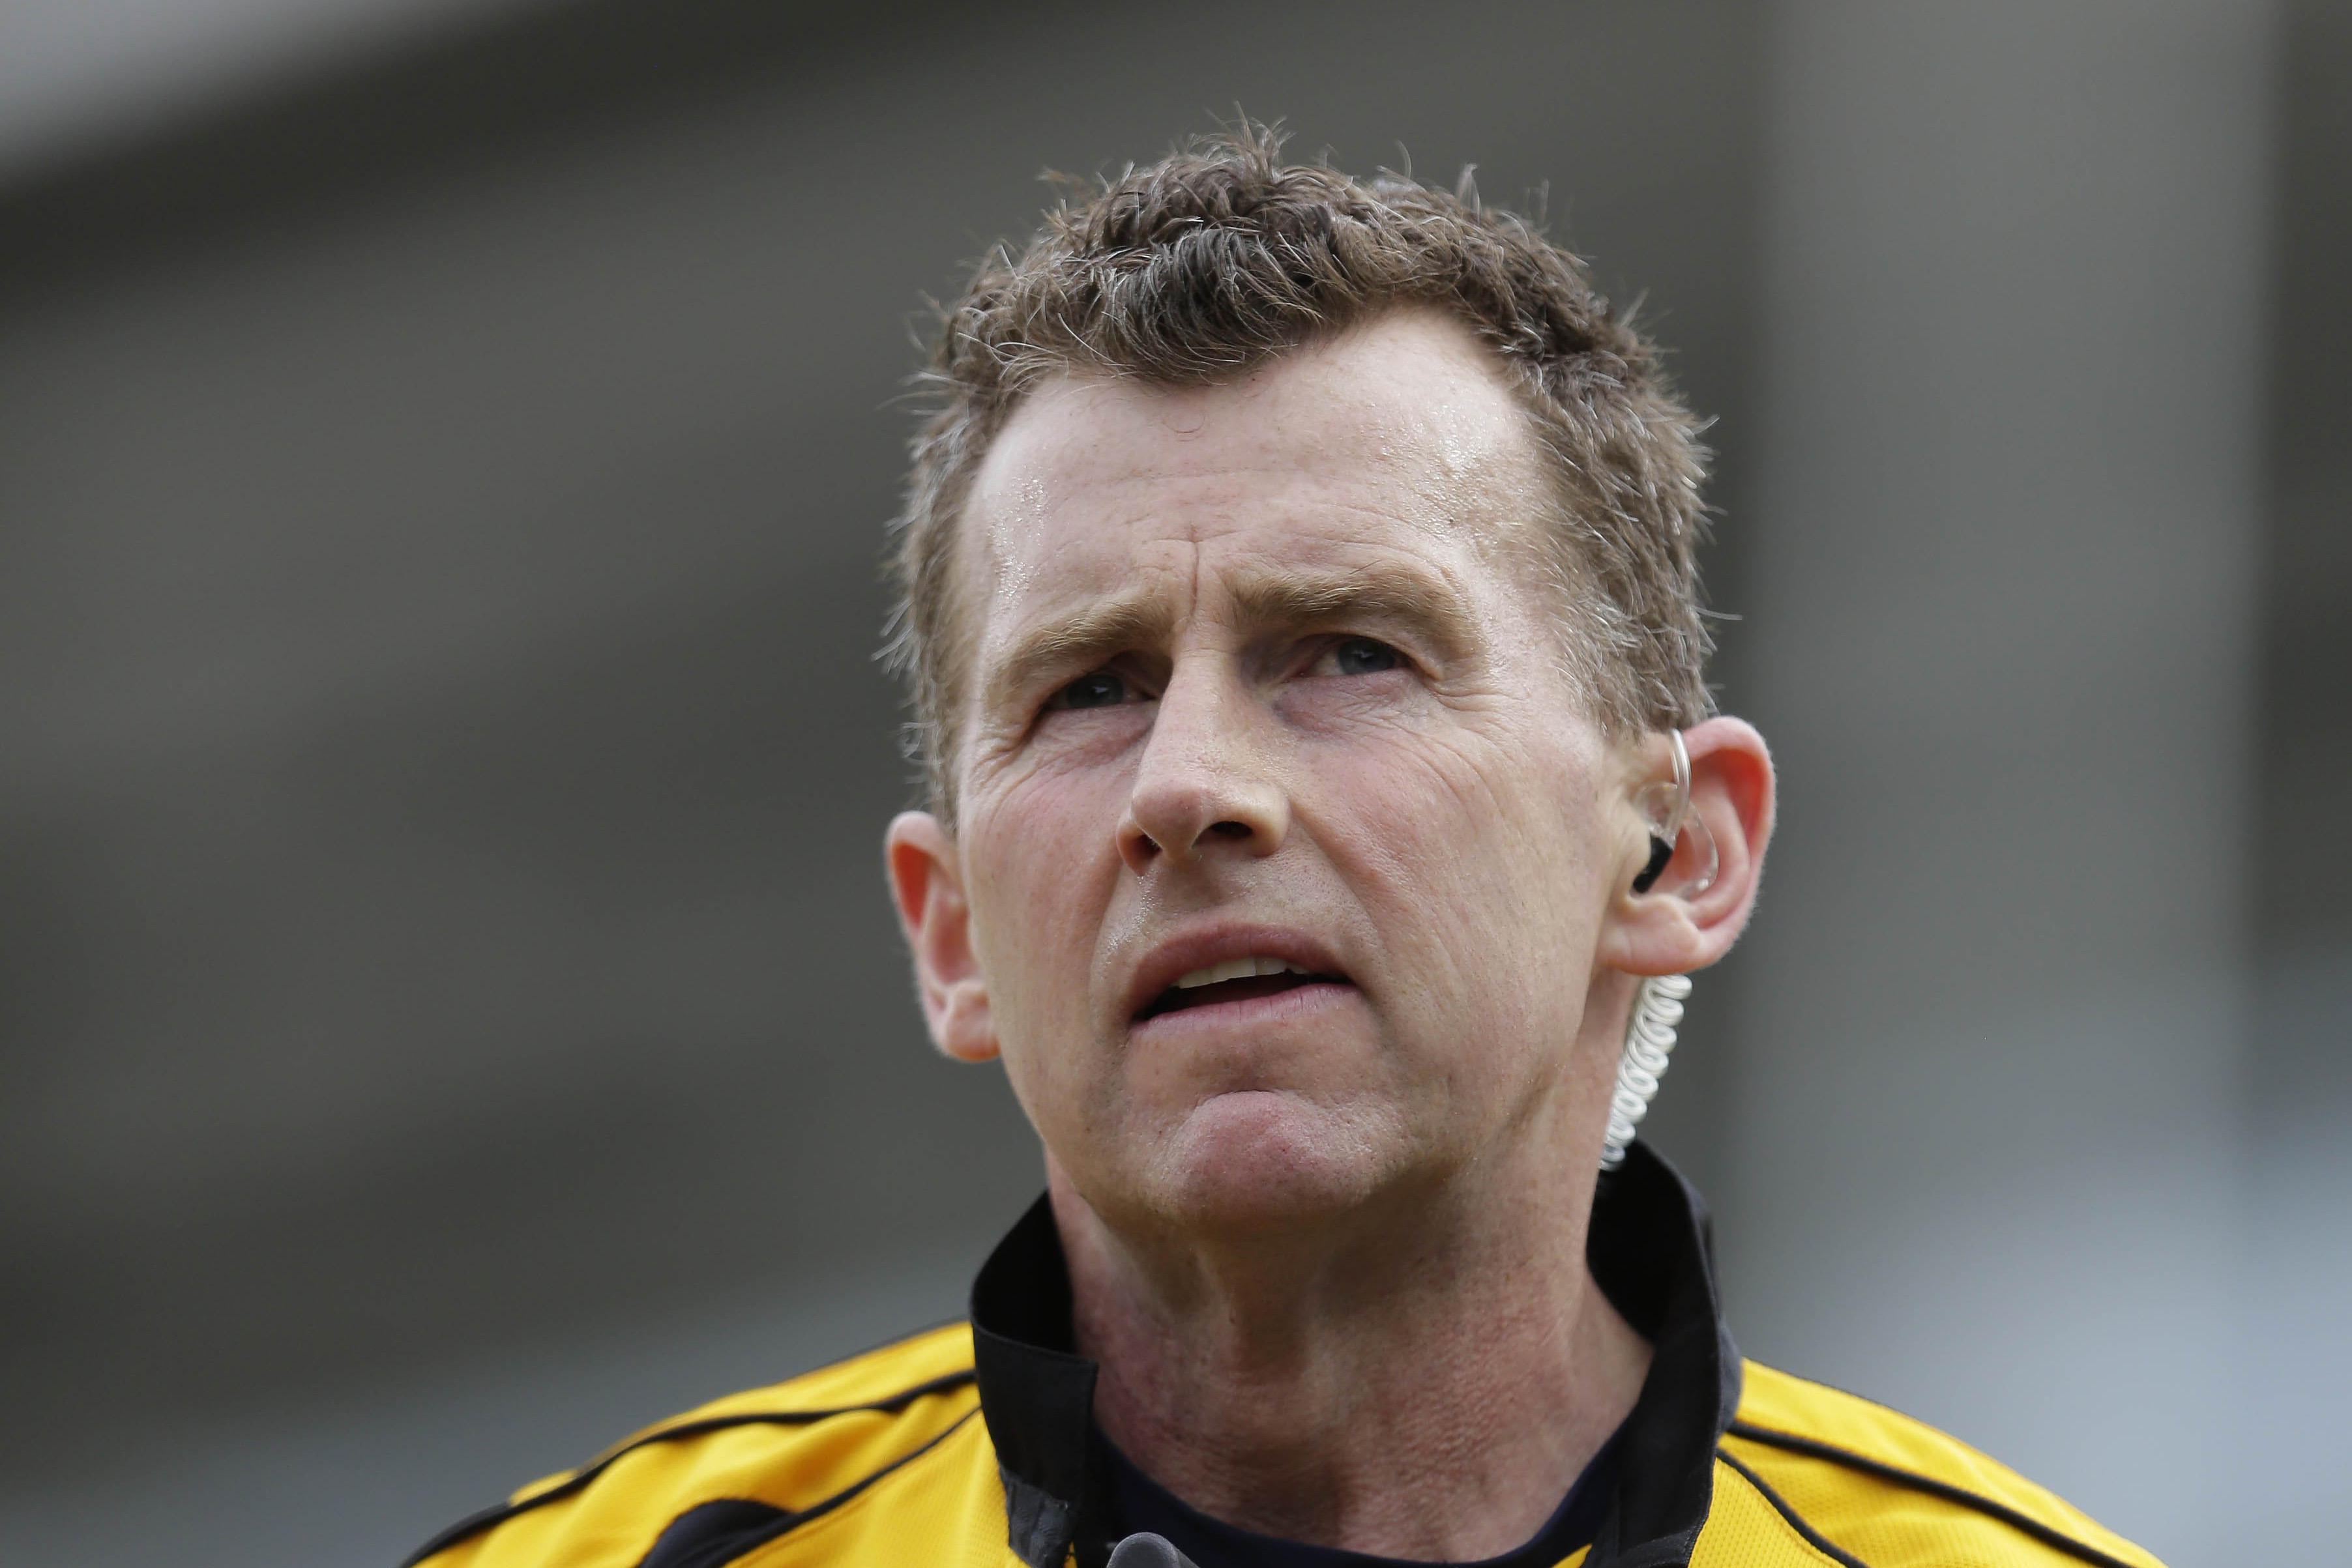 Nigel Owens is one of the most respected referees in world rugby